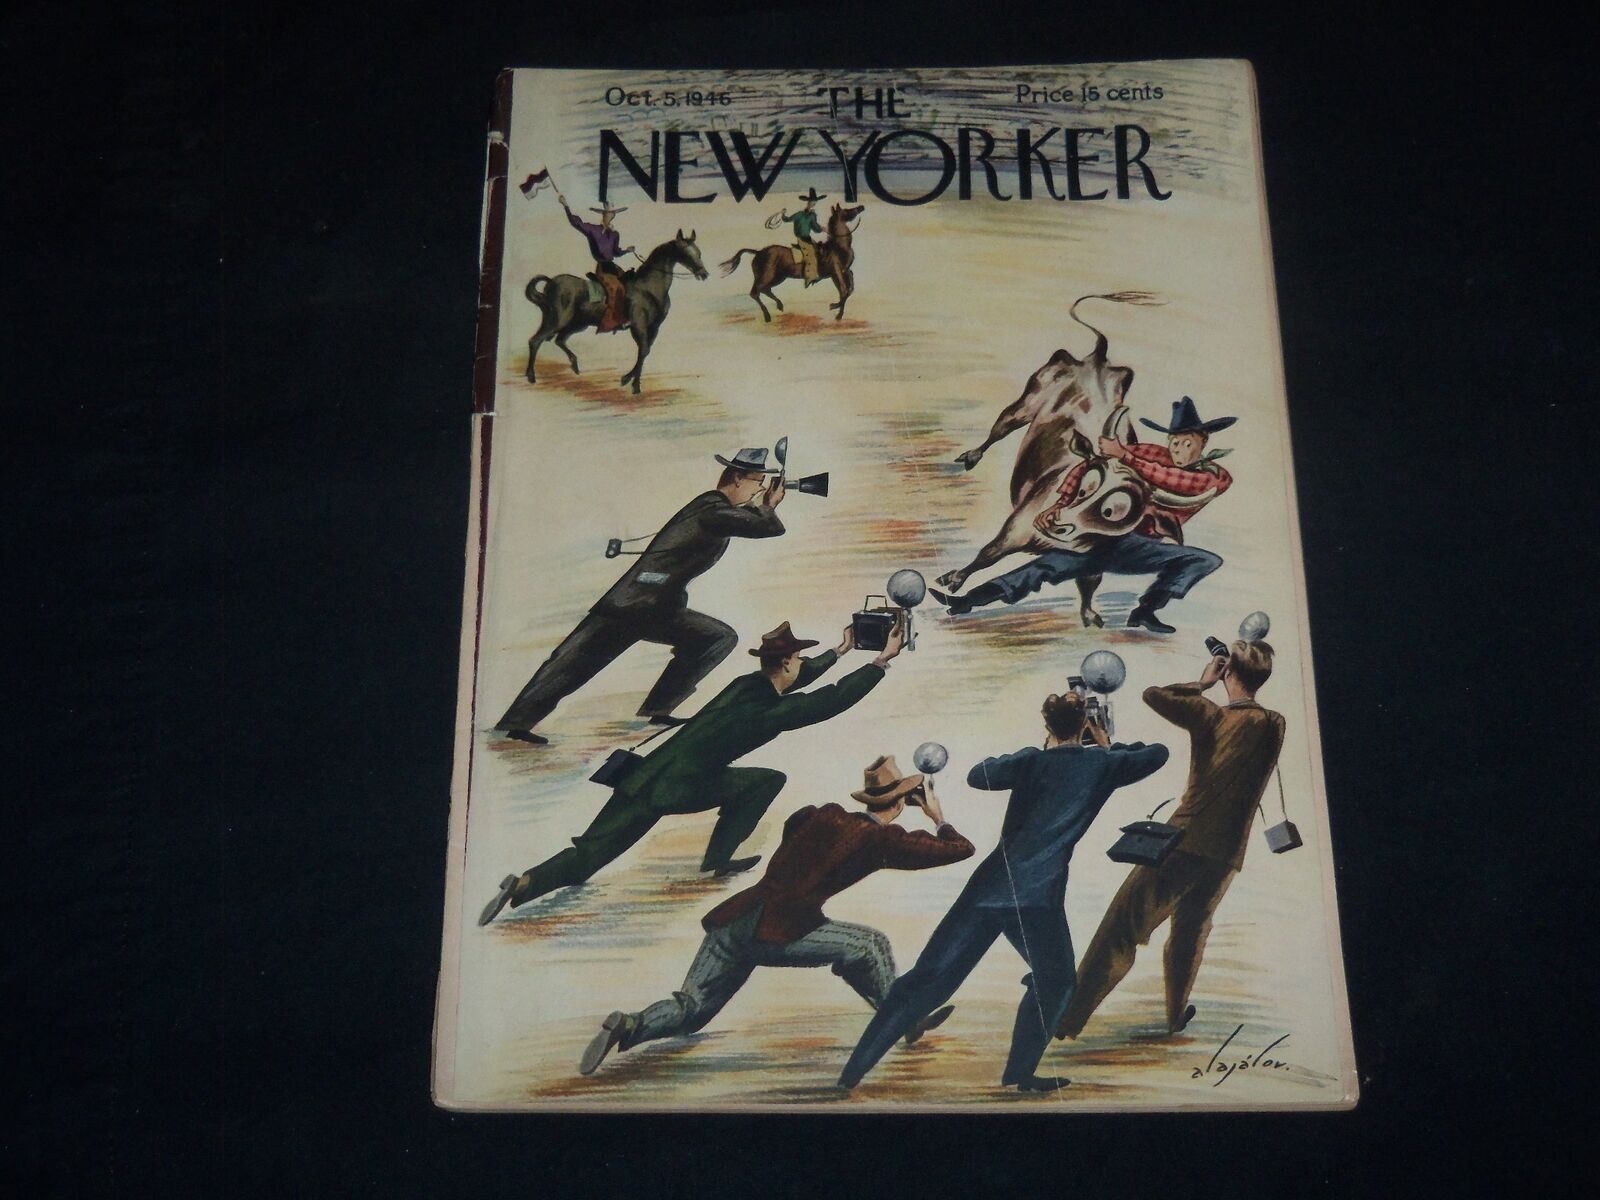 1946 OCTOBER 5 THE NEW YORKER MAGAZINE - NICE ILLUSTRATED COVER - NY 183